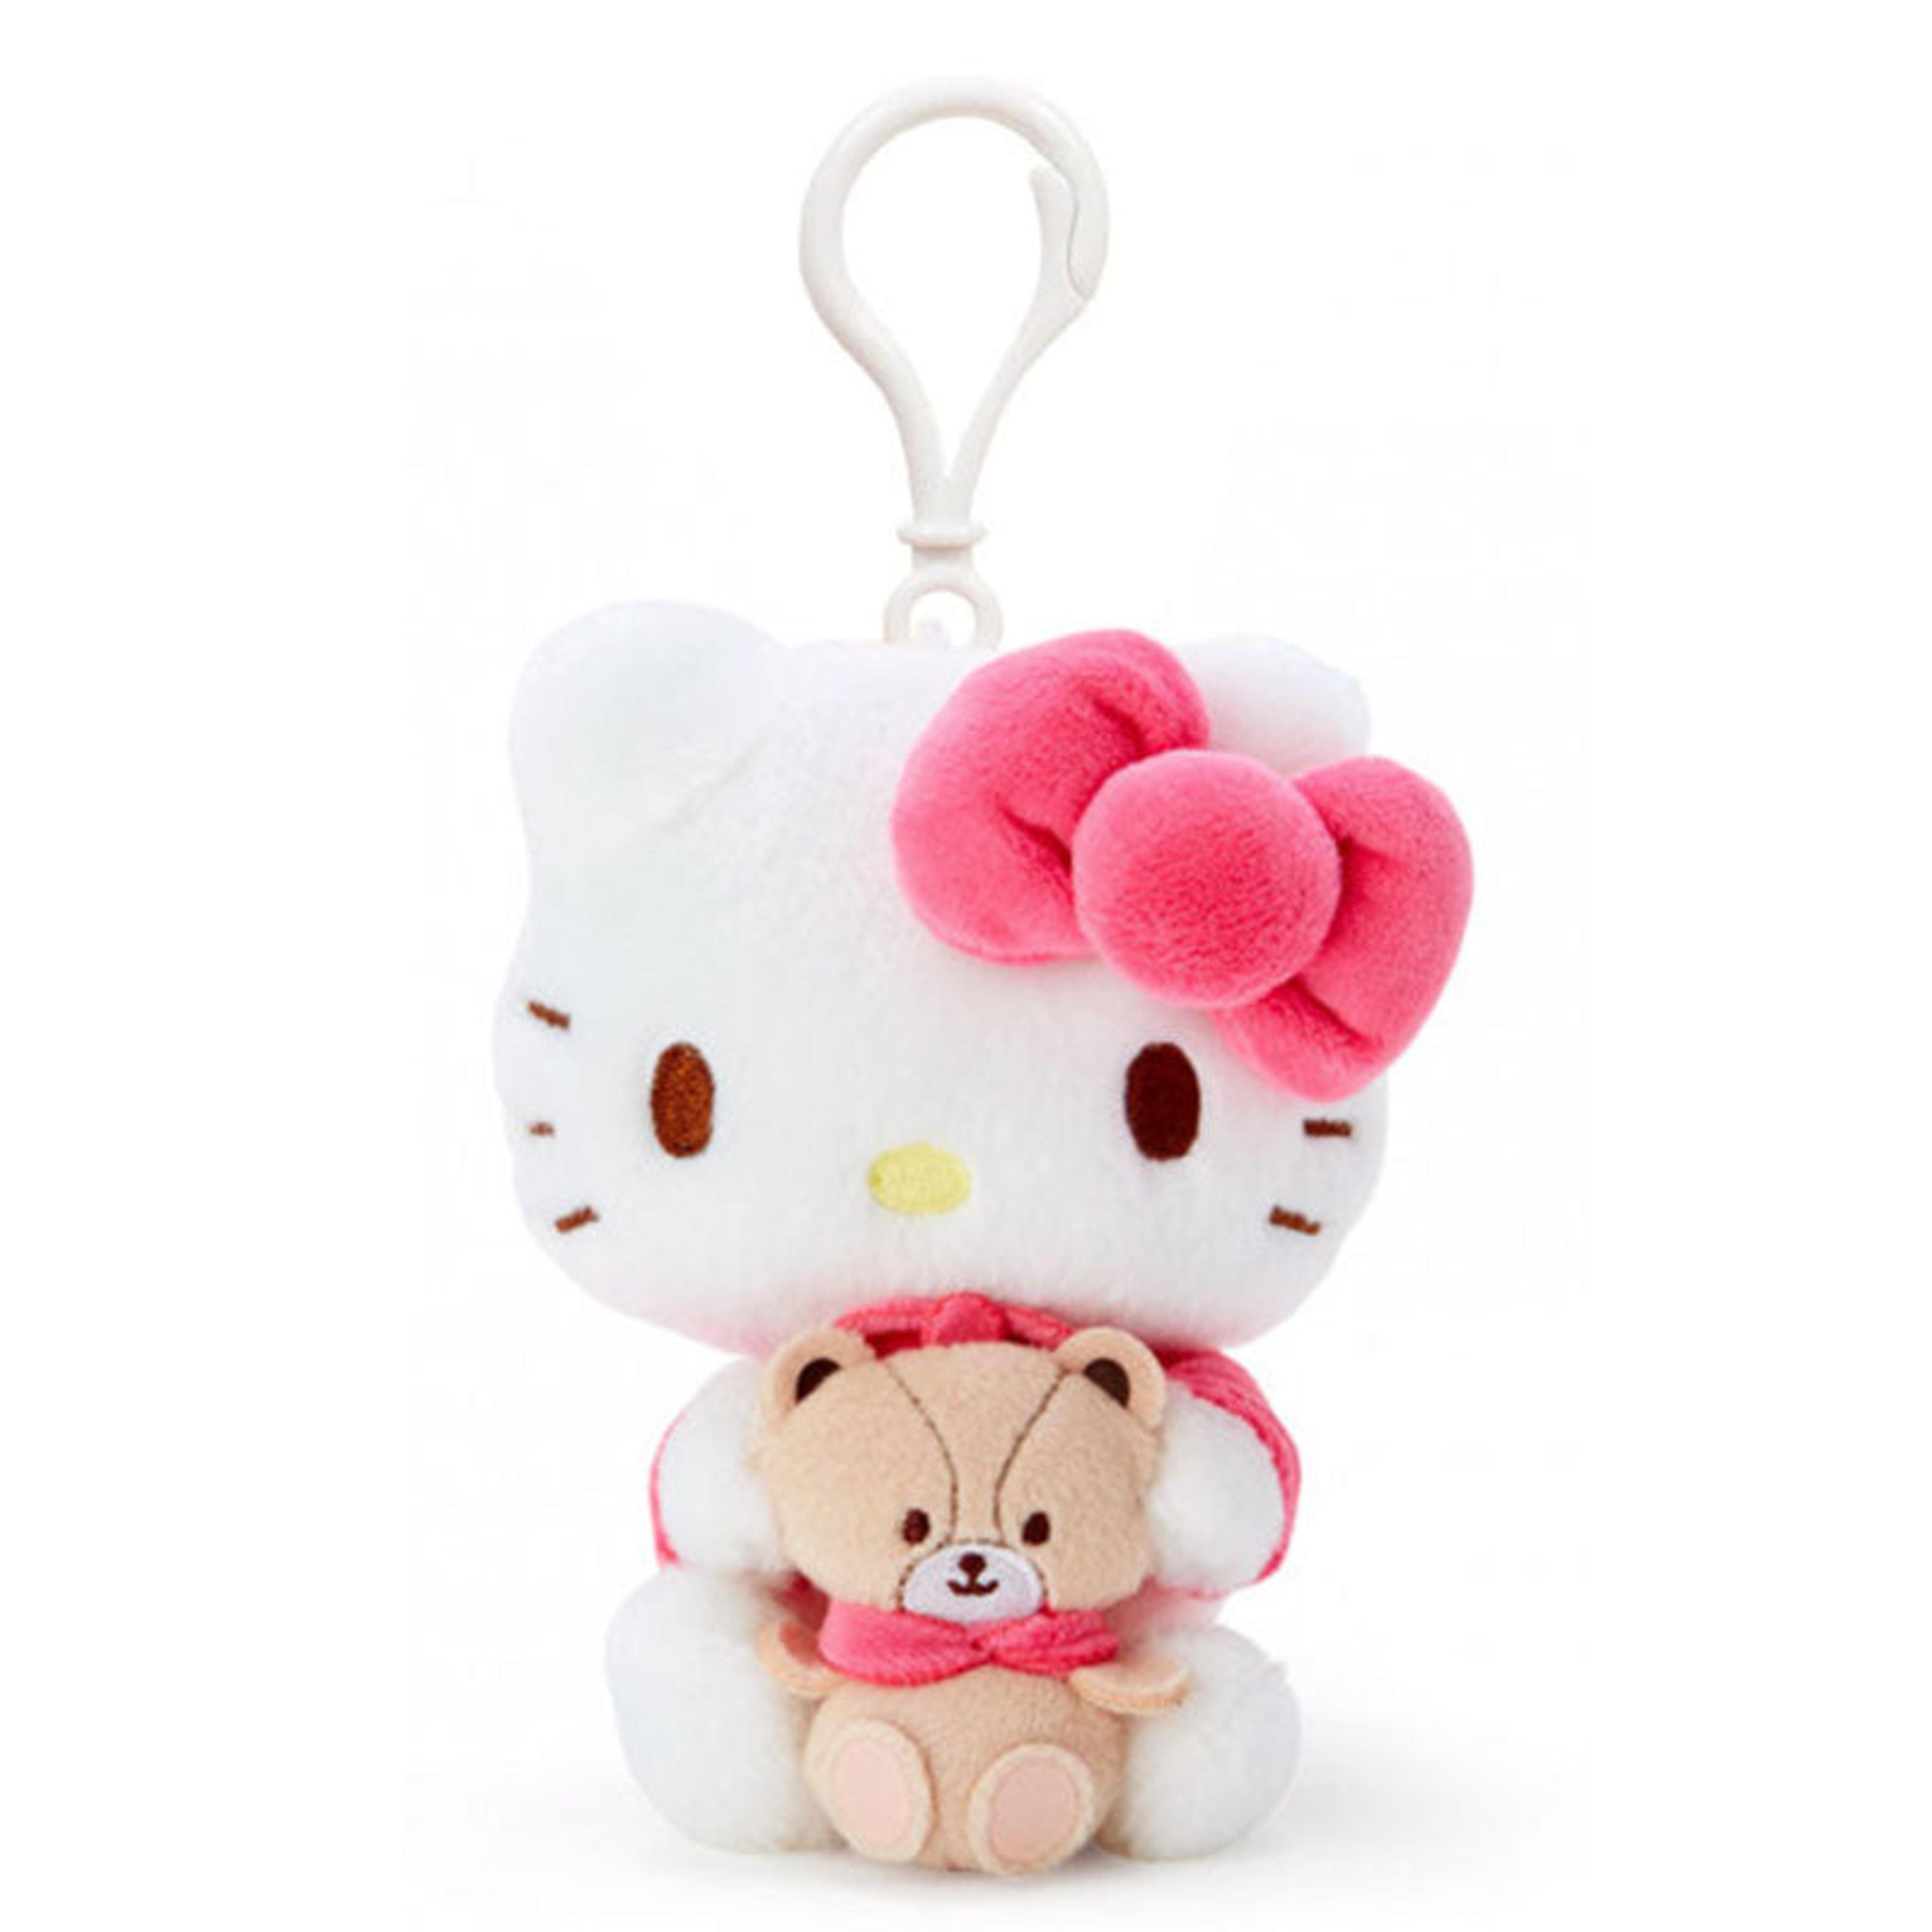 Alternate View 1 of Sanrio With Friend Clip On Mascot